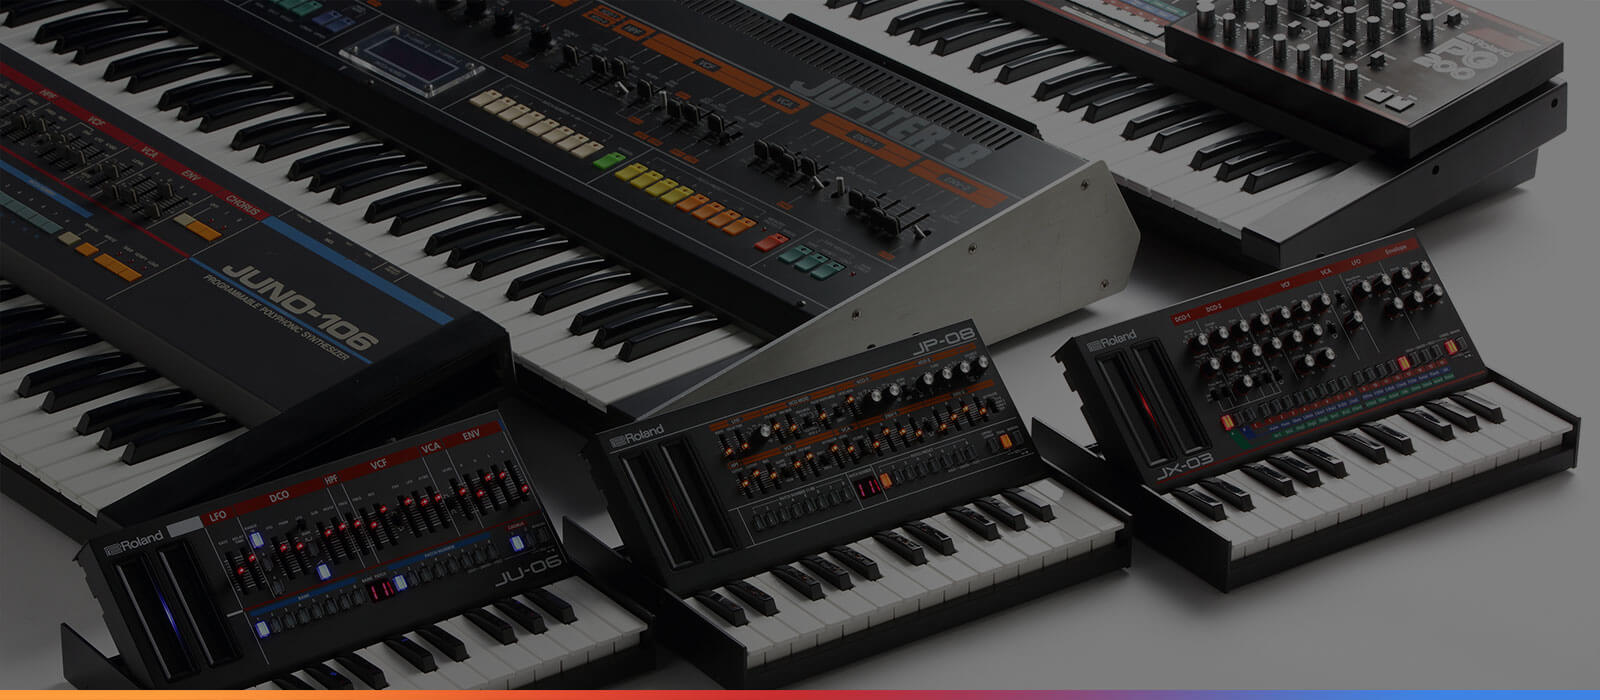 The Roland Boutique Series Story